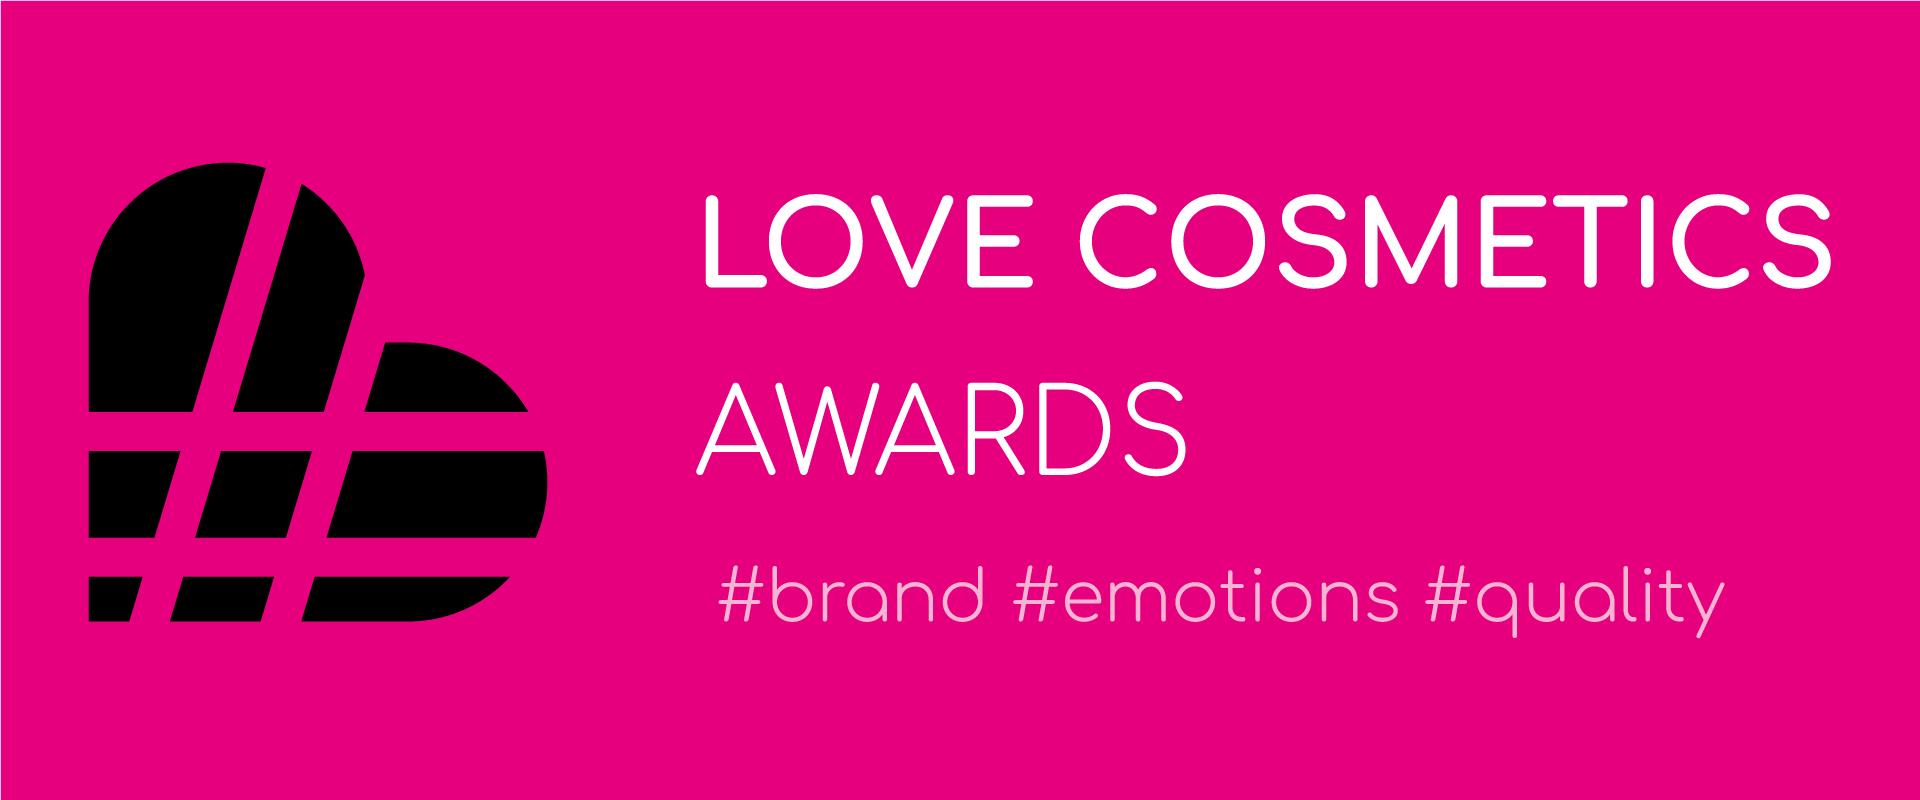 Love Cosmetics Awards Logo Protected in All EU Countries!